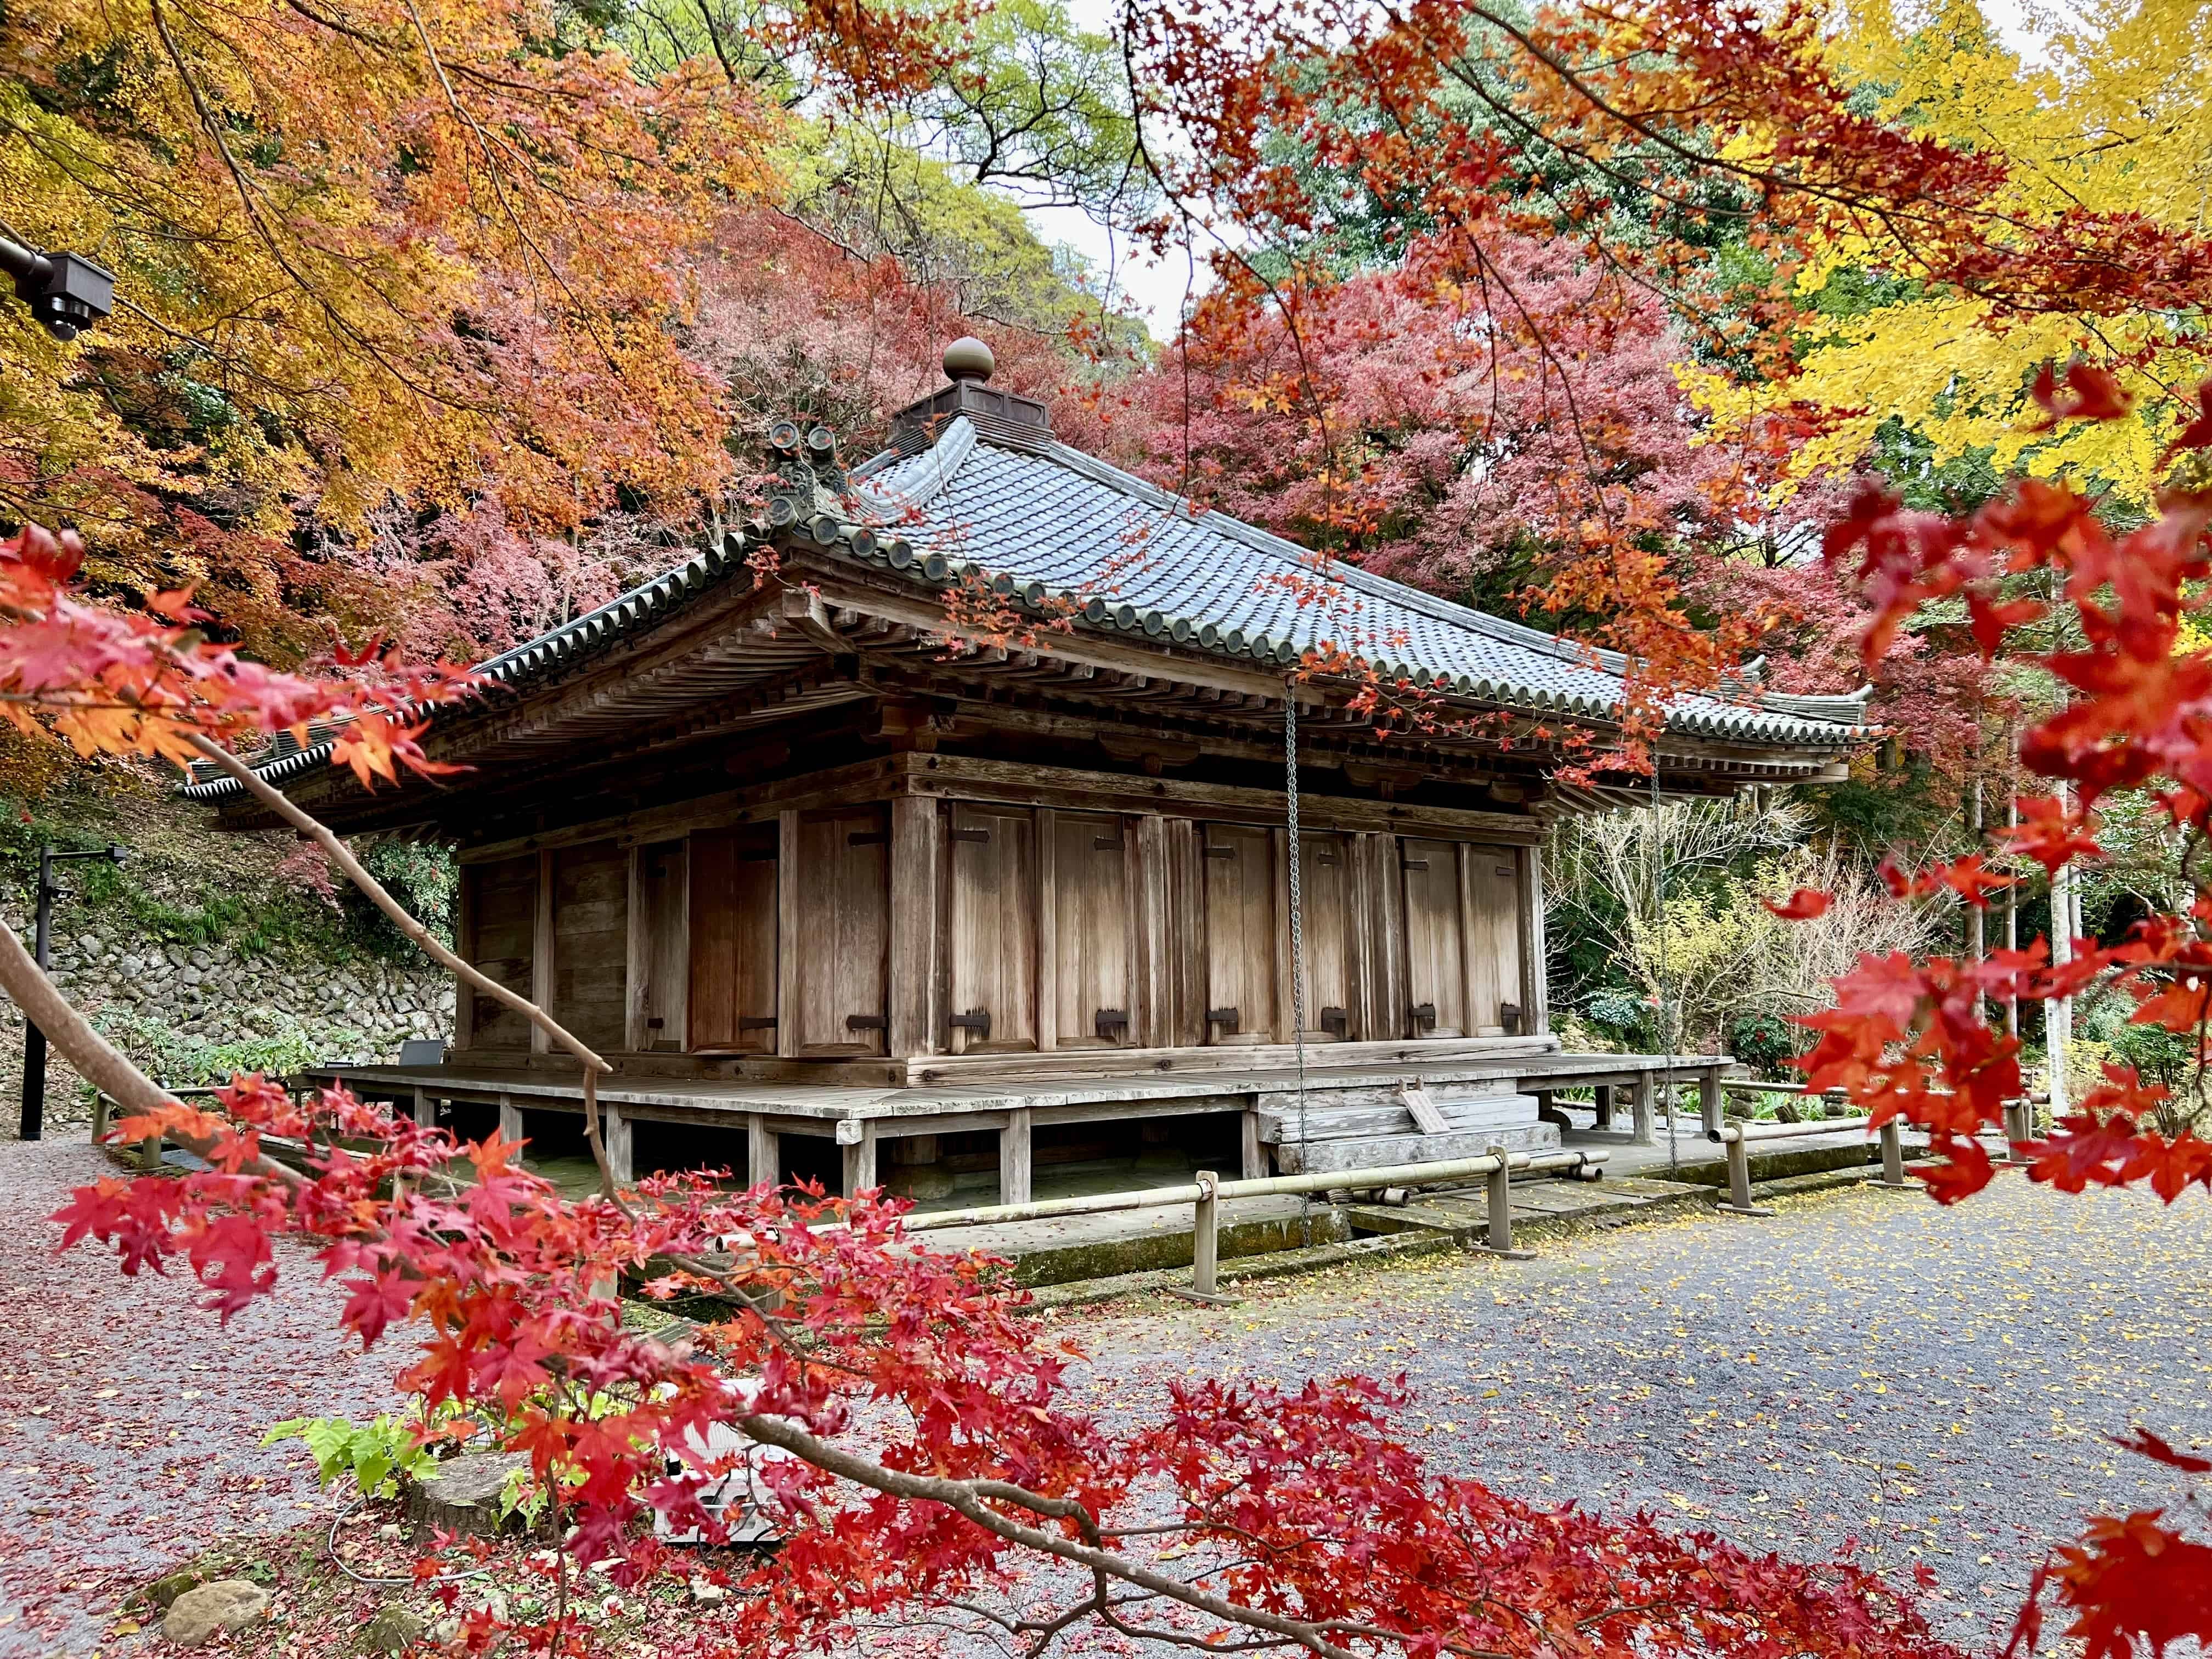 Ancient wooden temple amid colored maple leaves.